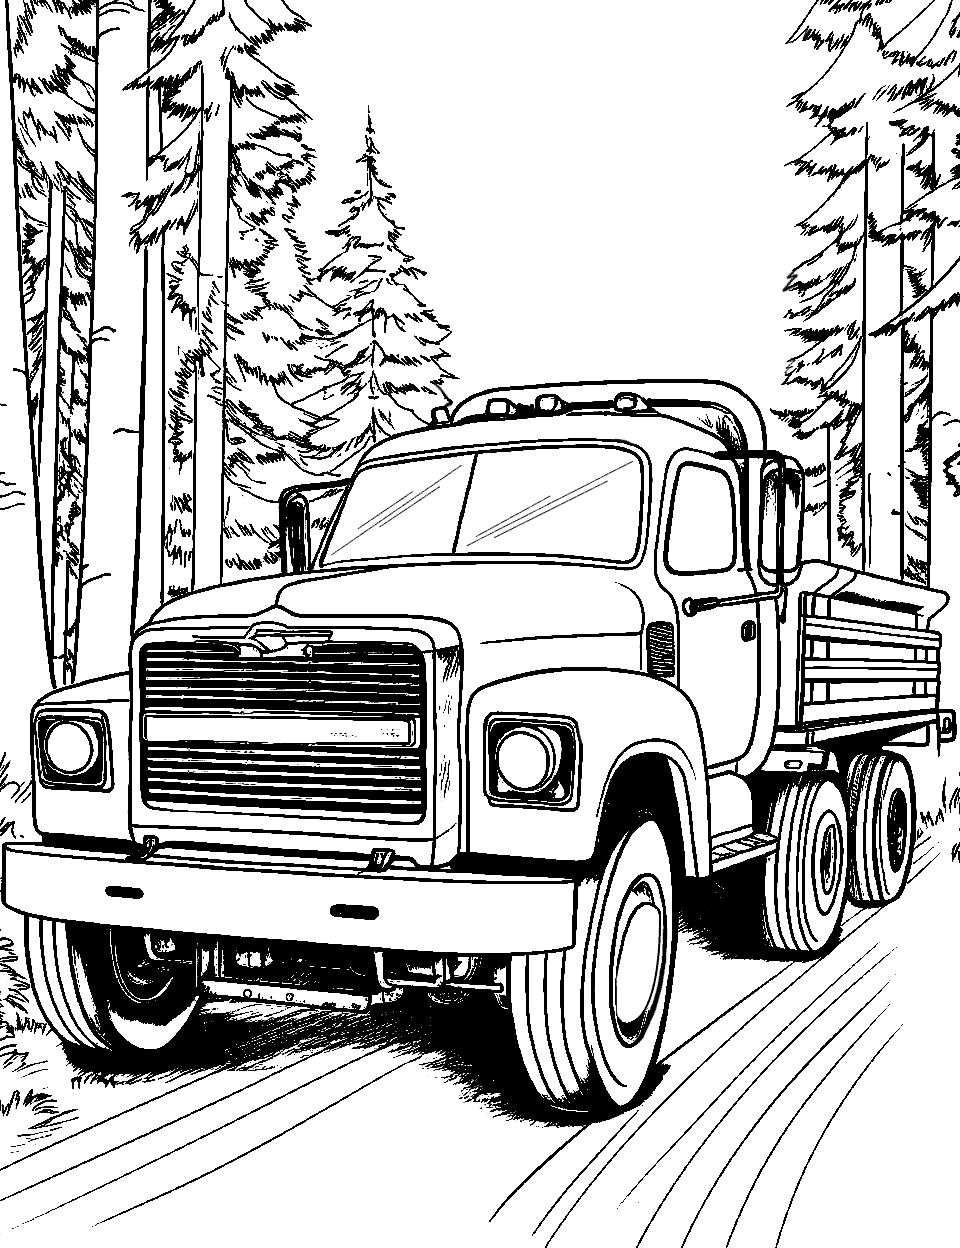 Enchanting Forest Drive Coloring Page - A truck on a gentle forest path.